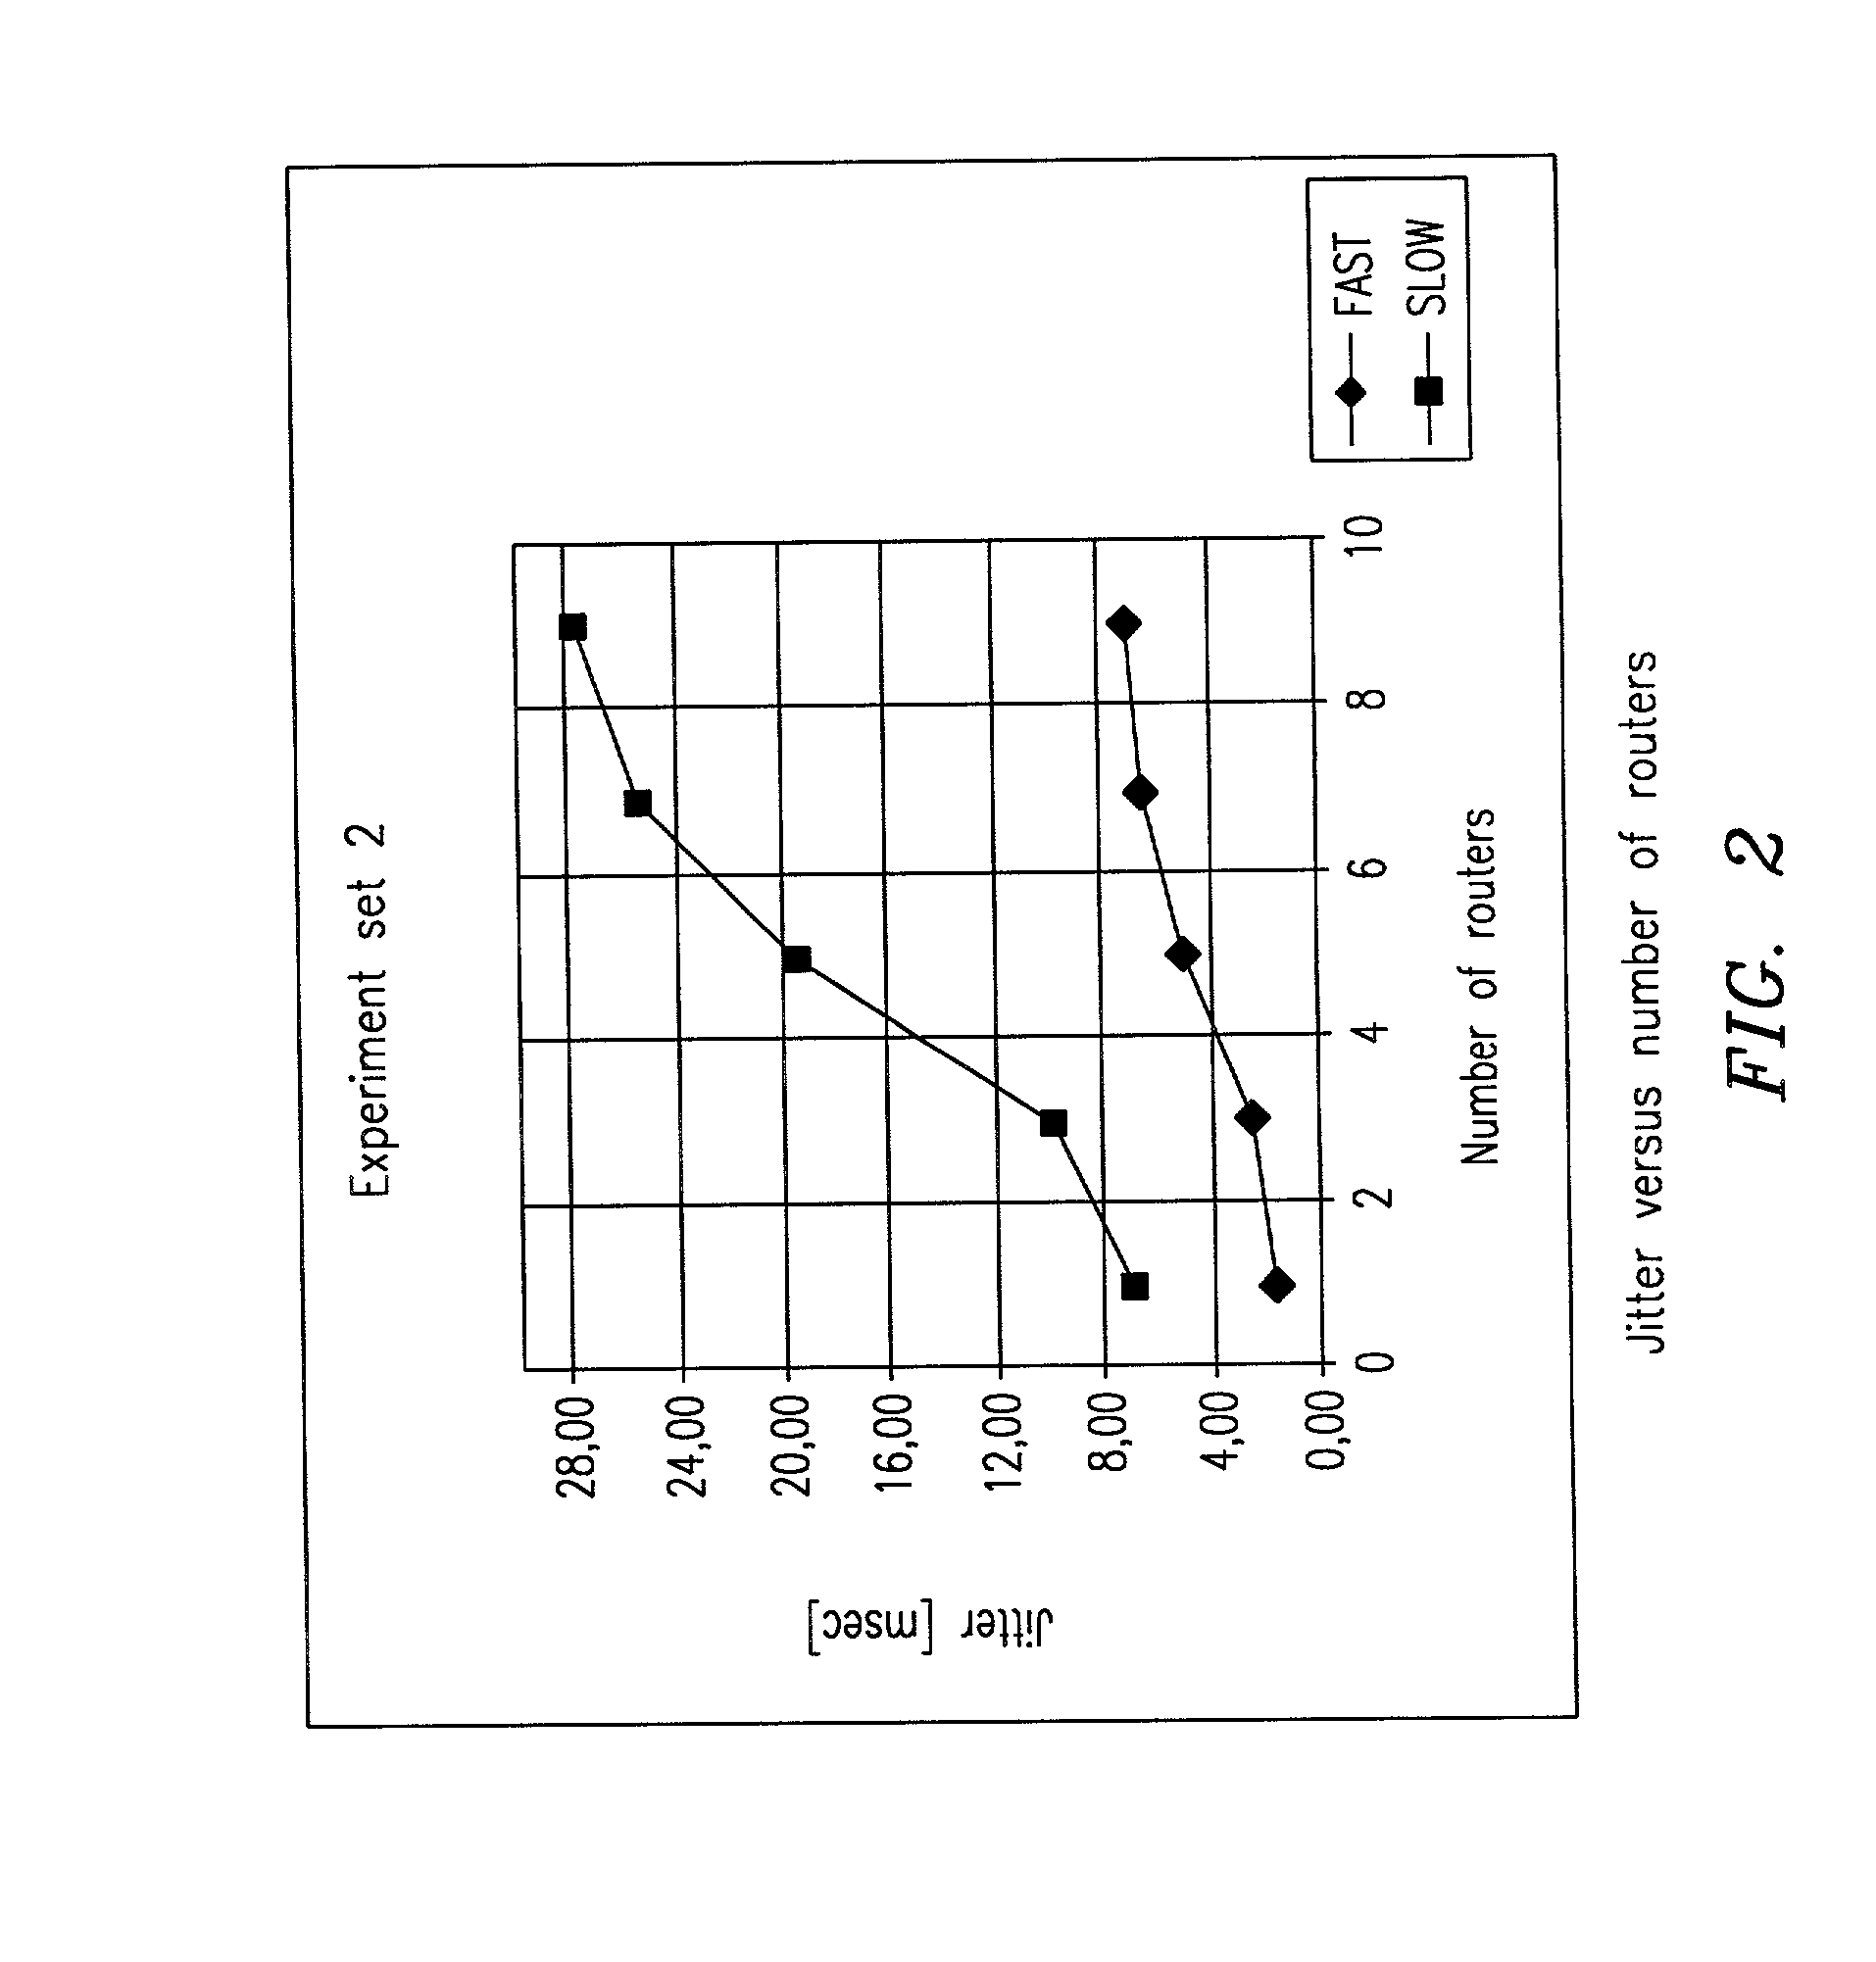 Jitter reduction in Differentiated Services (DiffServ) networks